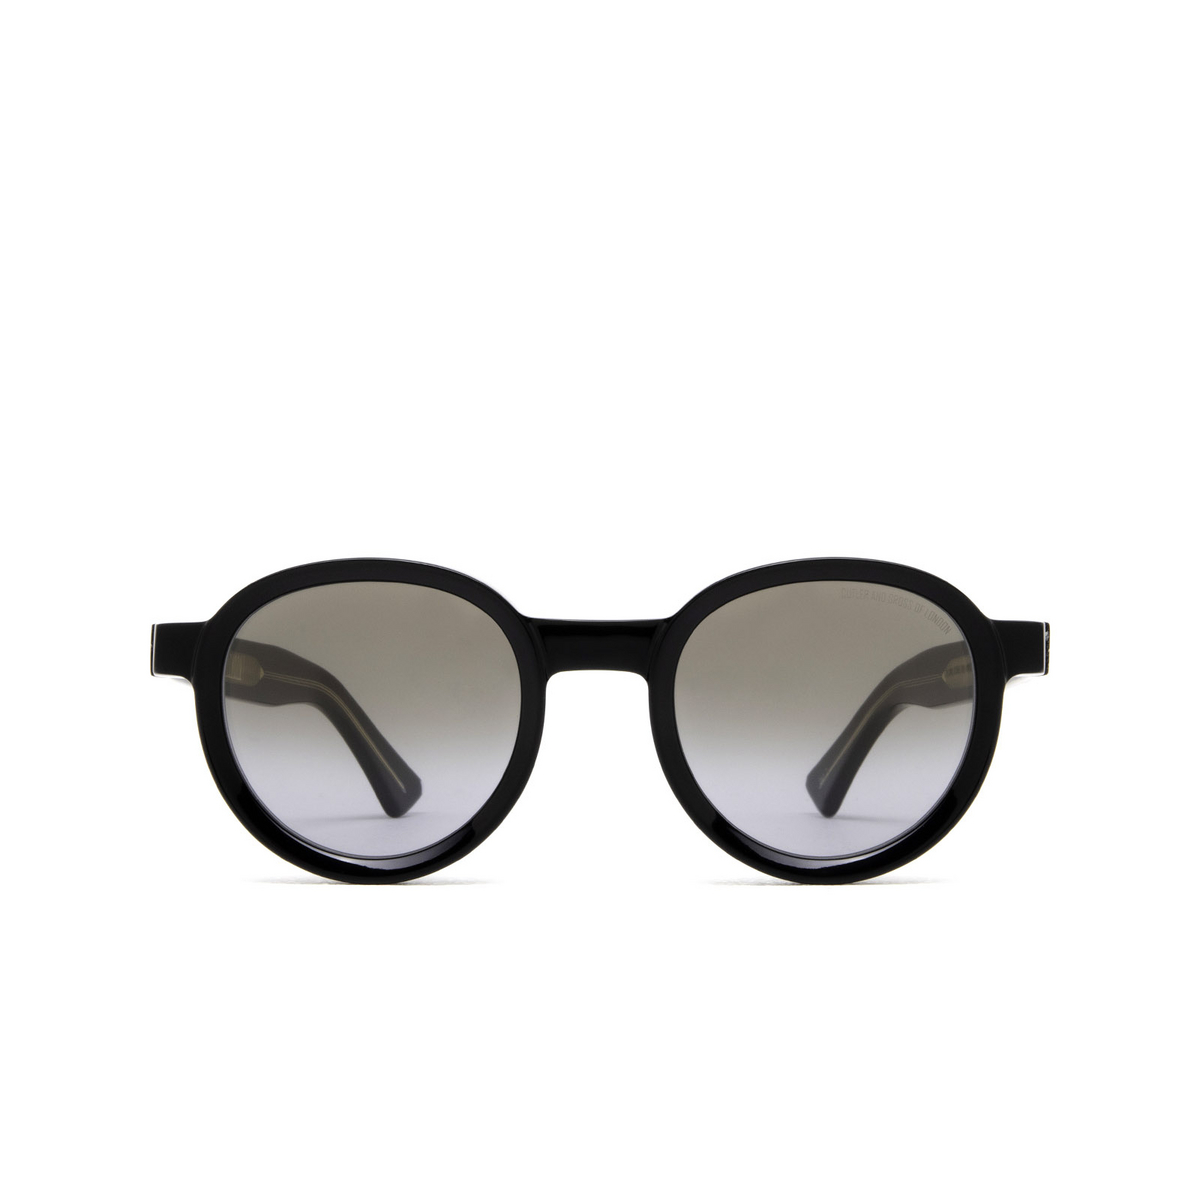 Cutler and Gross® Round Sunglasses: 1384 SUN color Black 01 - front view.